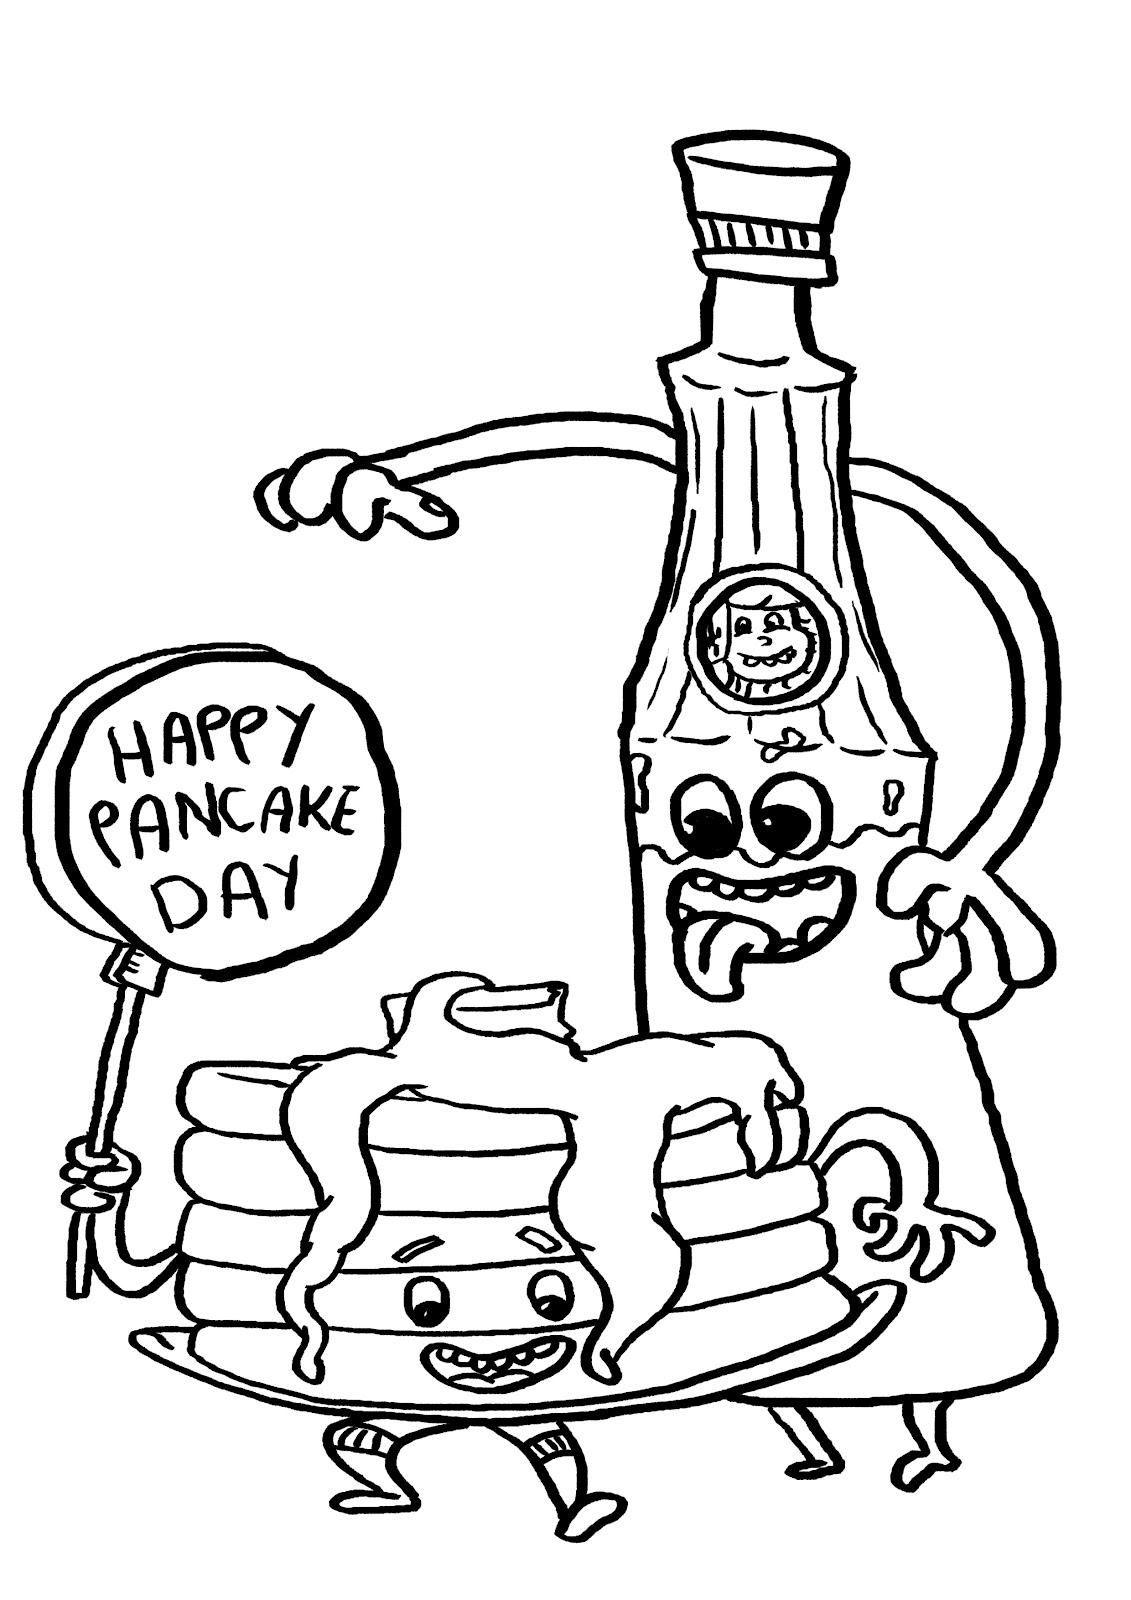 pancake-day-coloring-pages-coloring-home